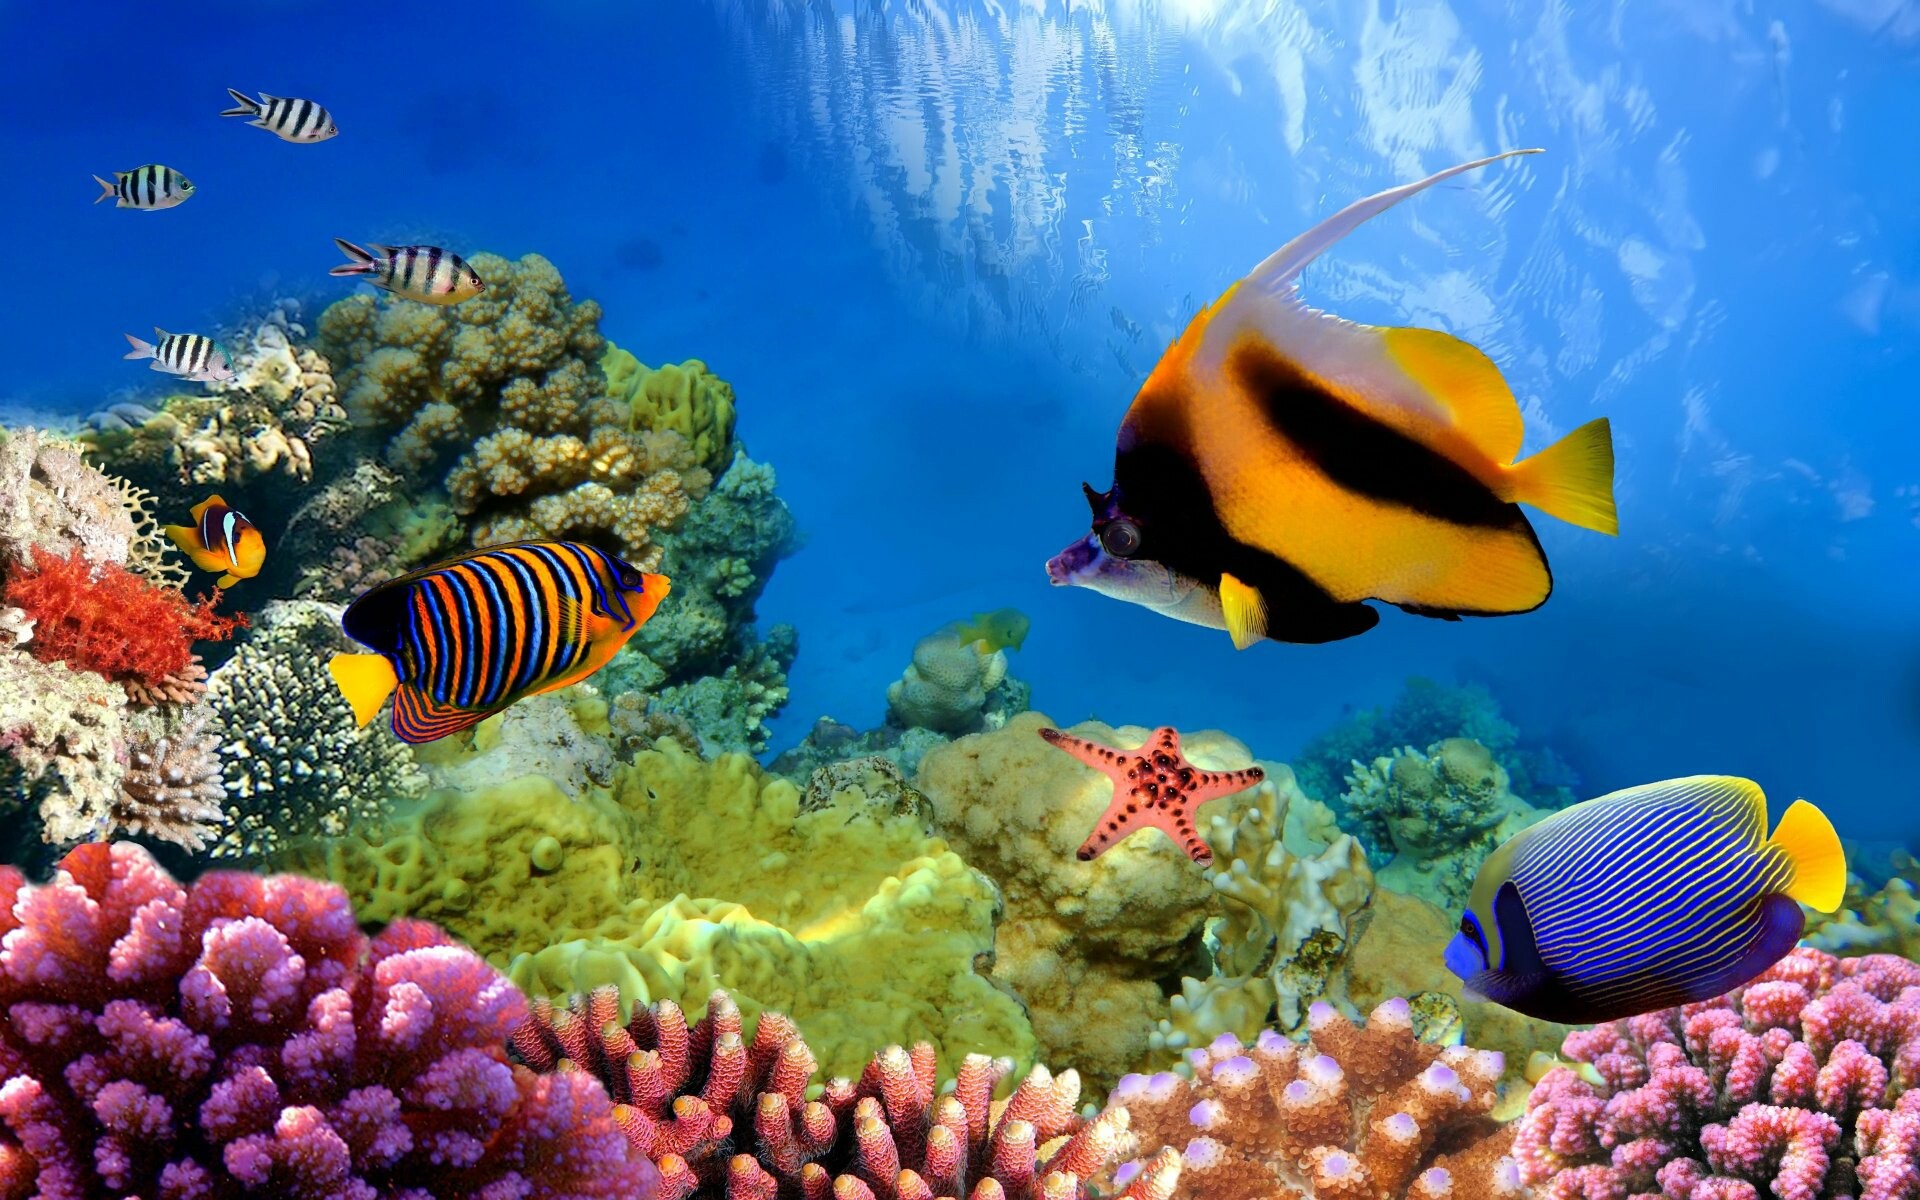 Great Barrier Reef: GBR, Consists of about 3,000 individual reefs of coral, and the biodiversity they contain is remarkable. 1920x1200 HD Wallpaper.